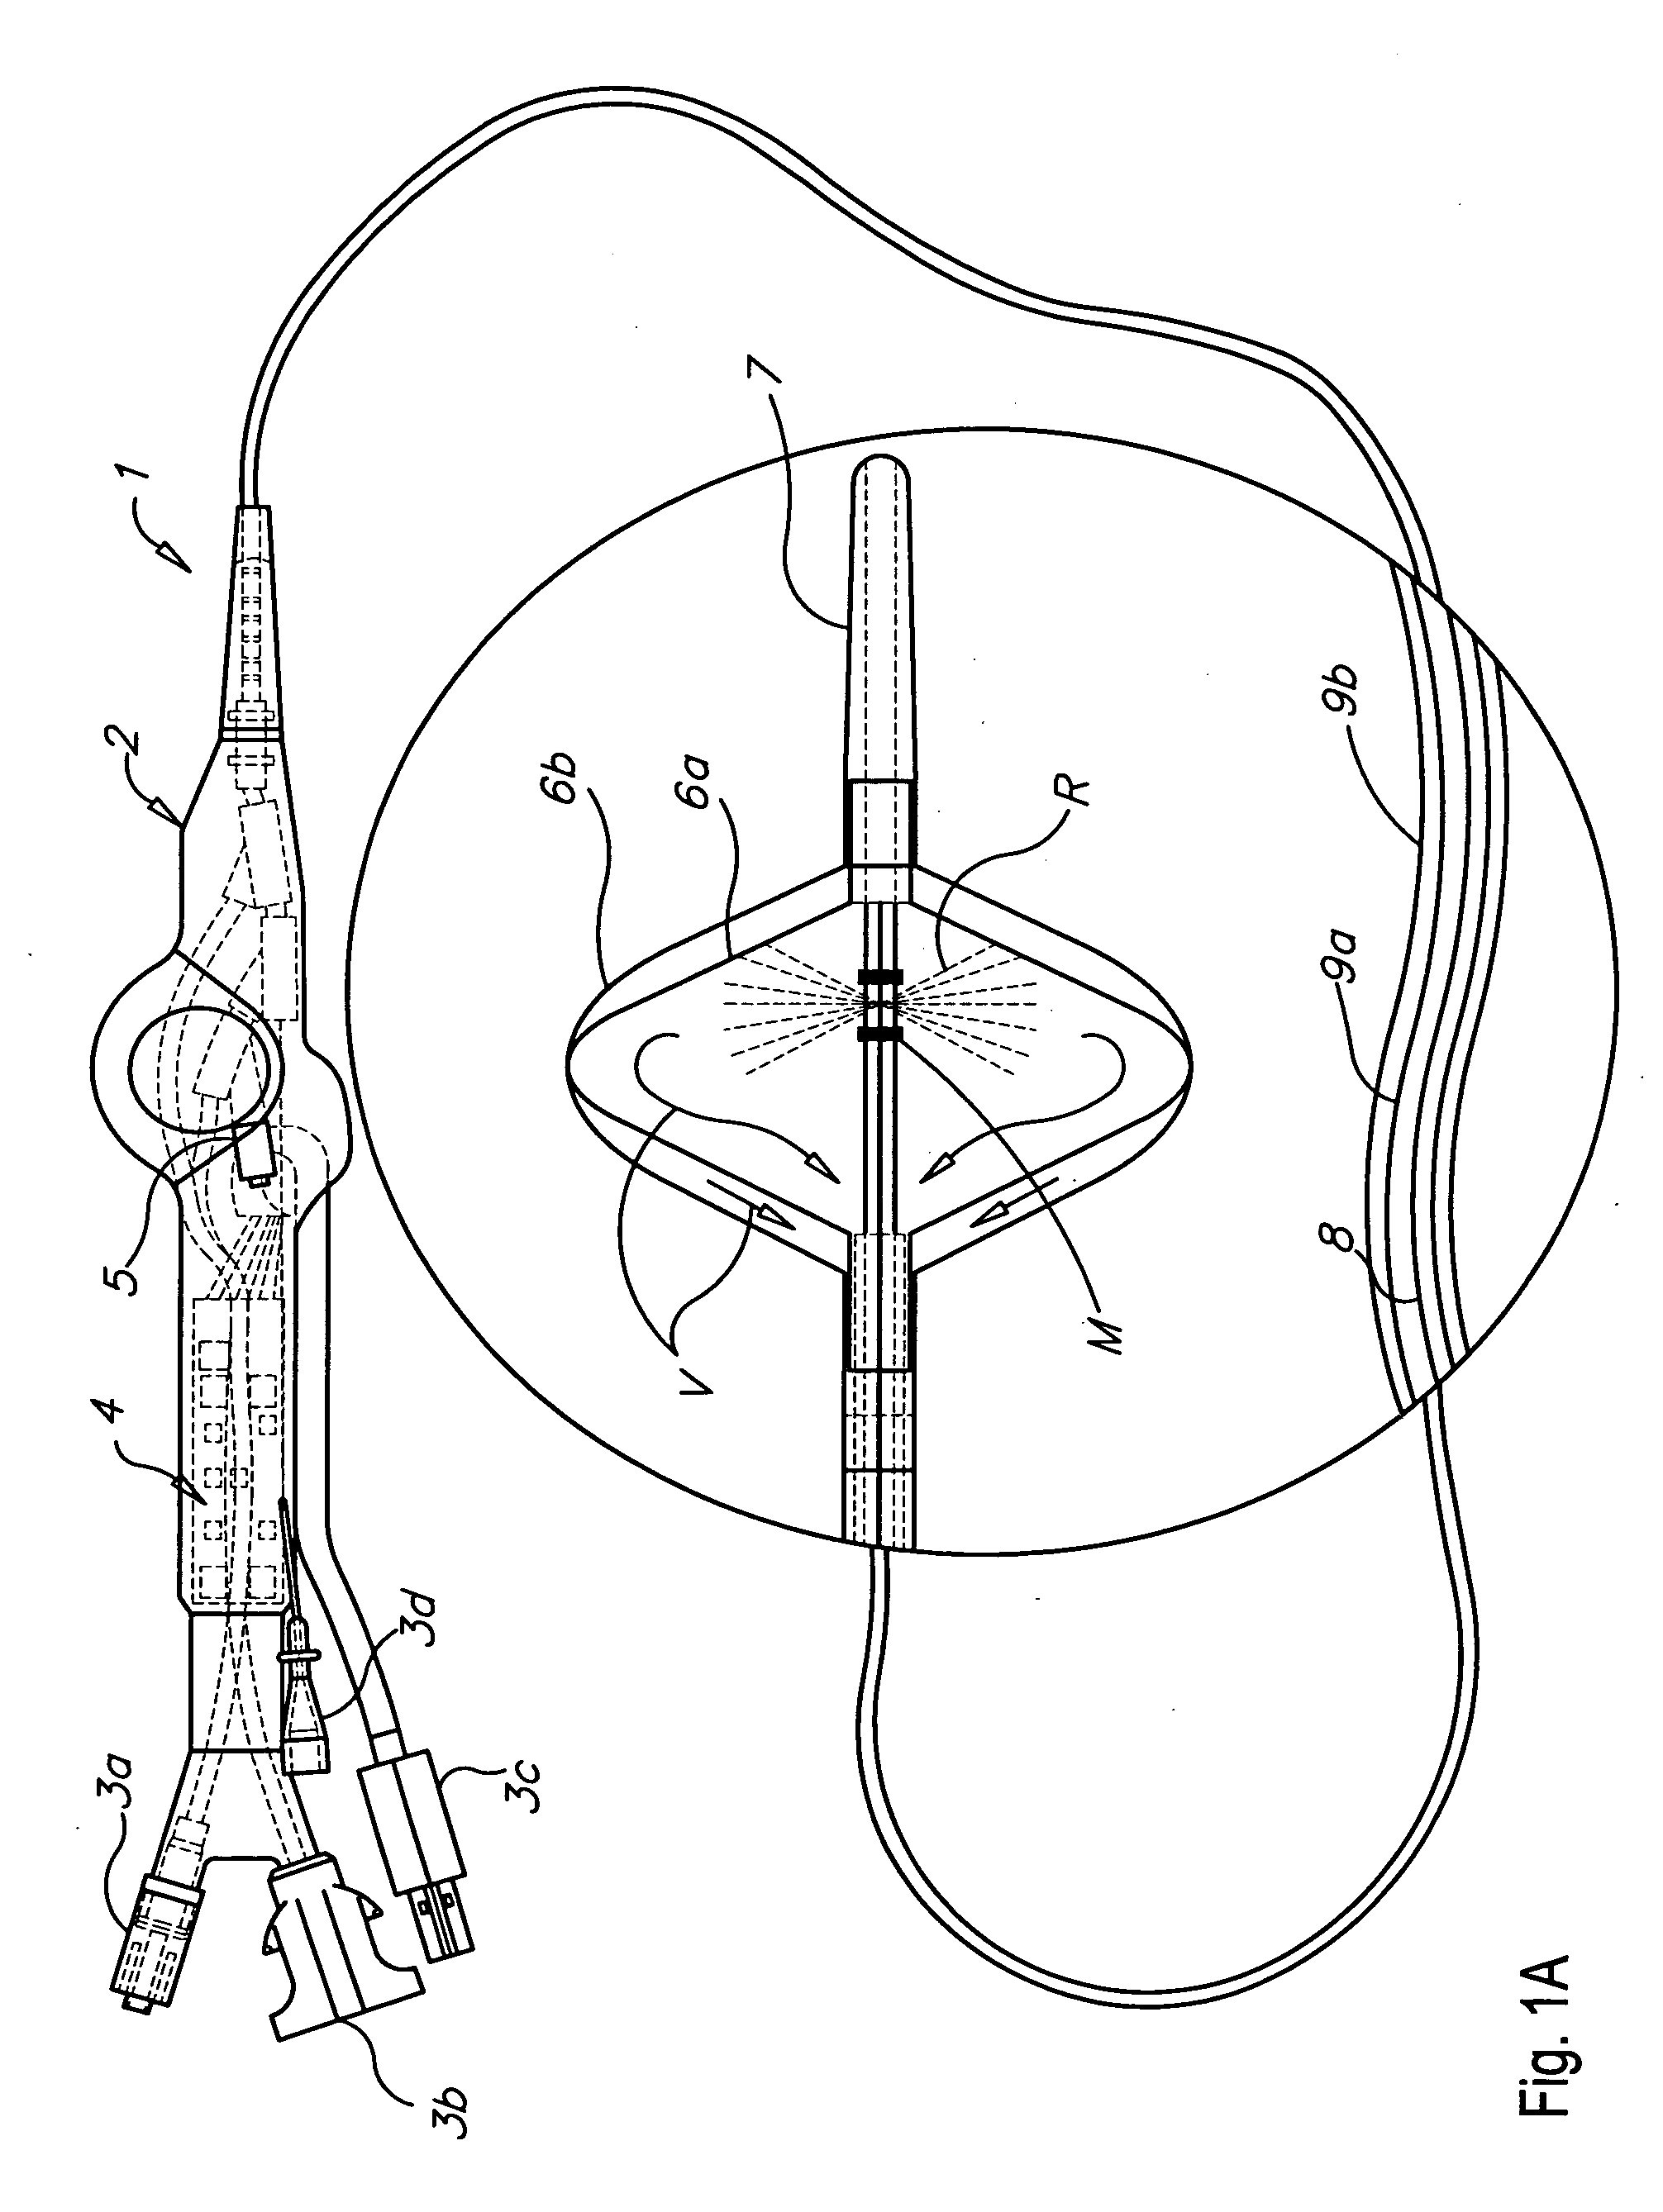 Method and apparatus for inflating and deflating balloon catheters